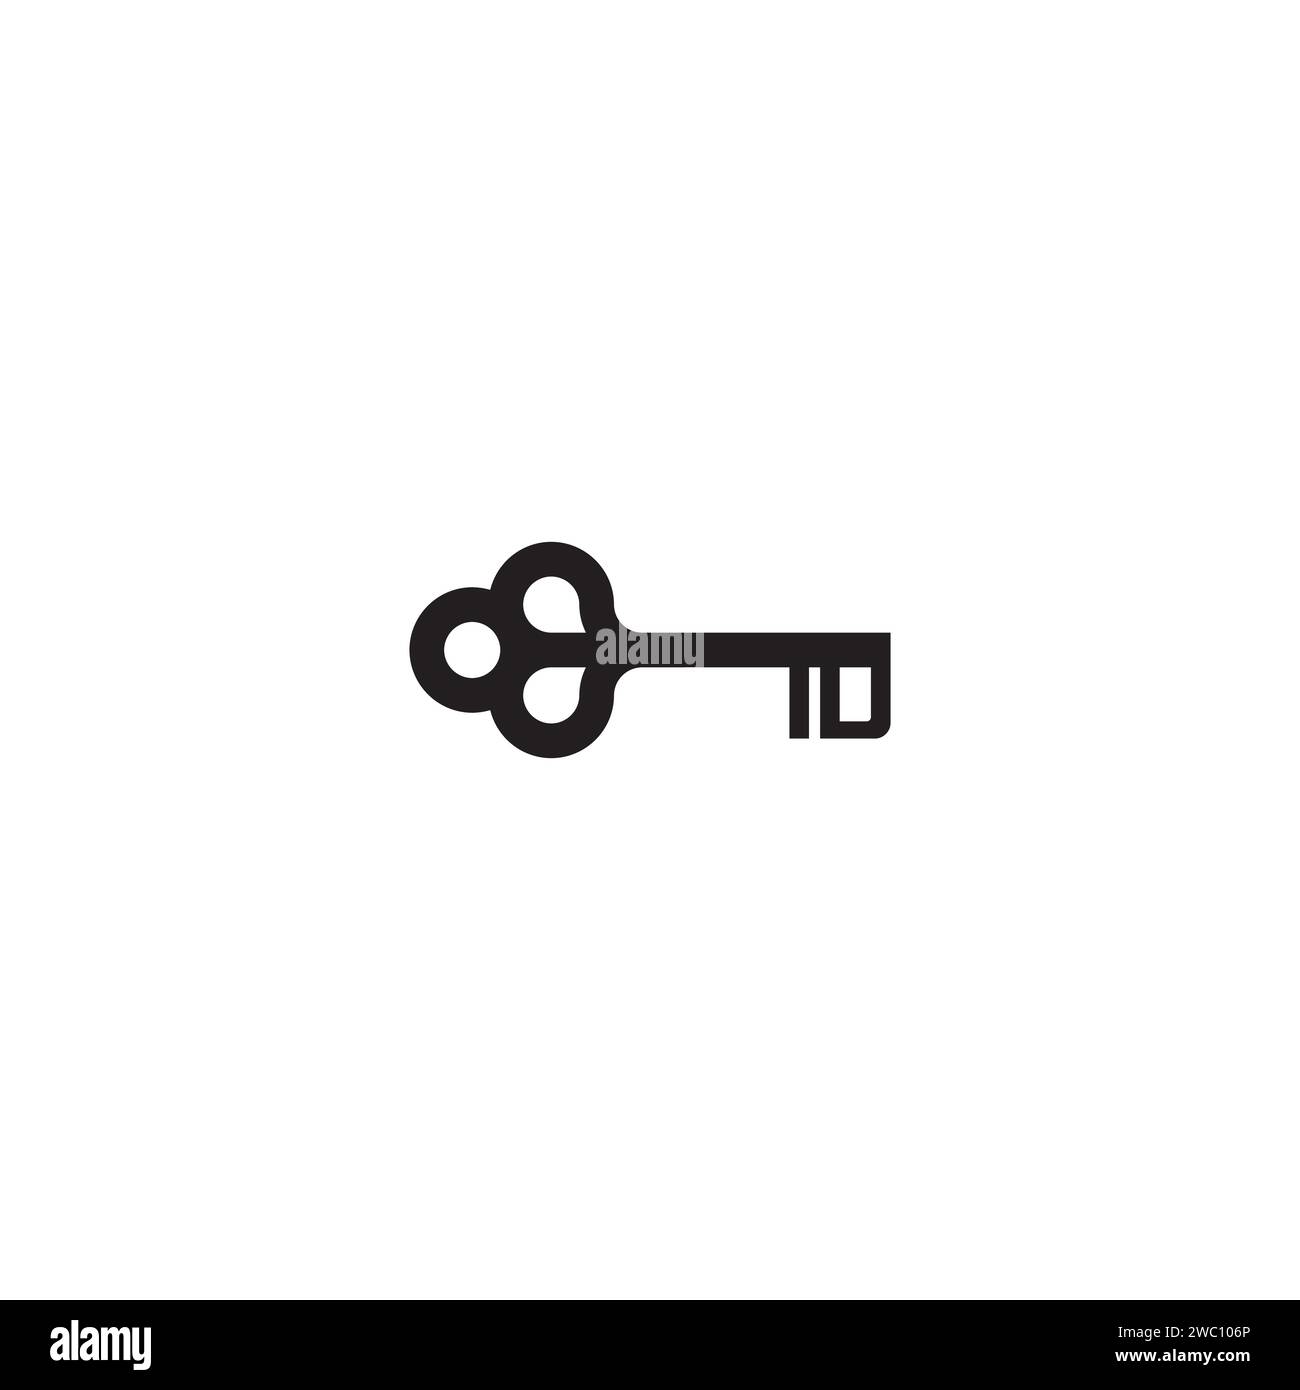 IU key concept in high quality professional design that will print well across any print media Stock Vector